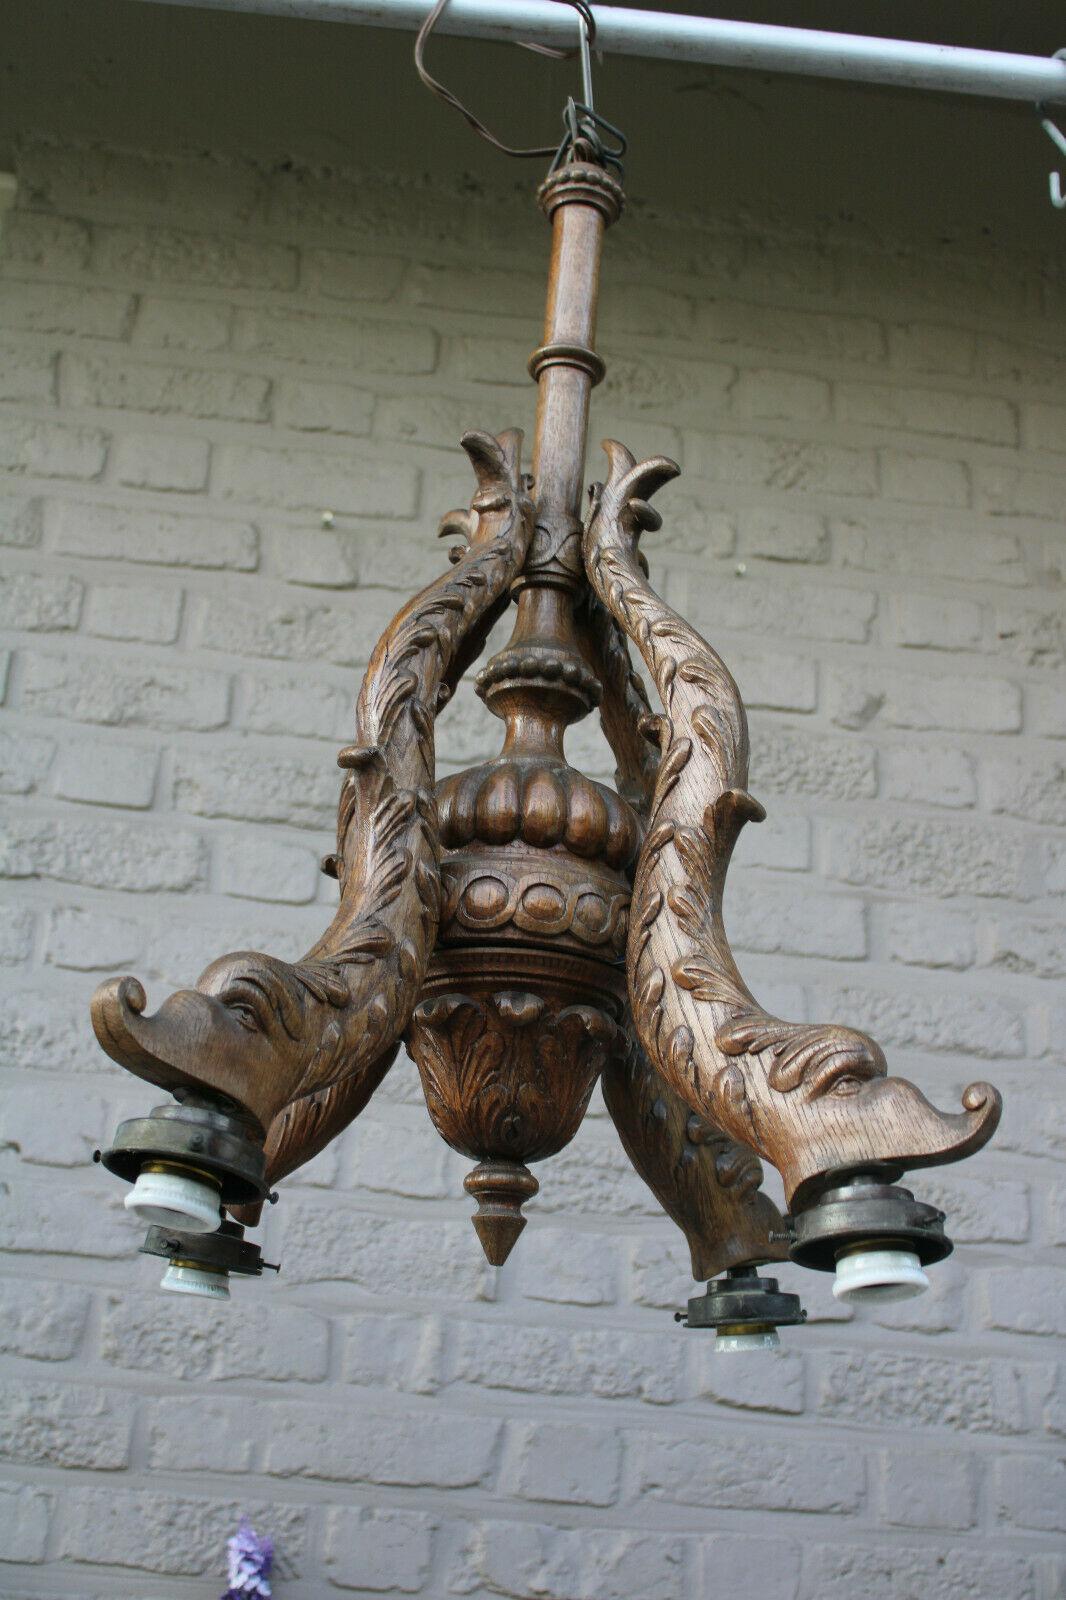 Stunning 1920s French Art Deco Expertly Carved Wood Koi/ Dolphin/ Sea Creature - Fish Chandelier. There are beautiful art glass flower shades included - they are dropping from the fish mouth - Beatiful! German estate acquisition.